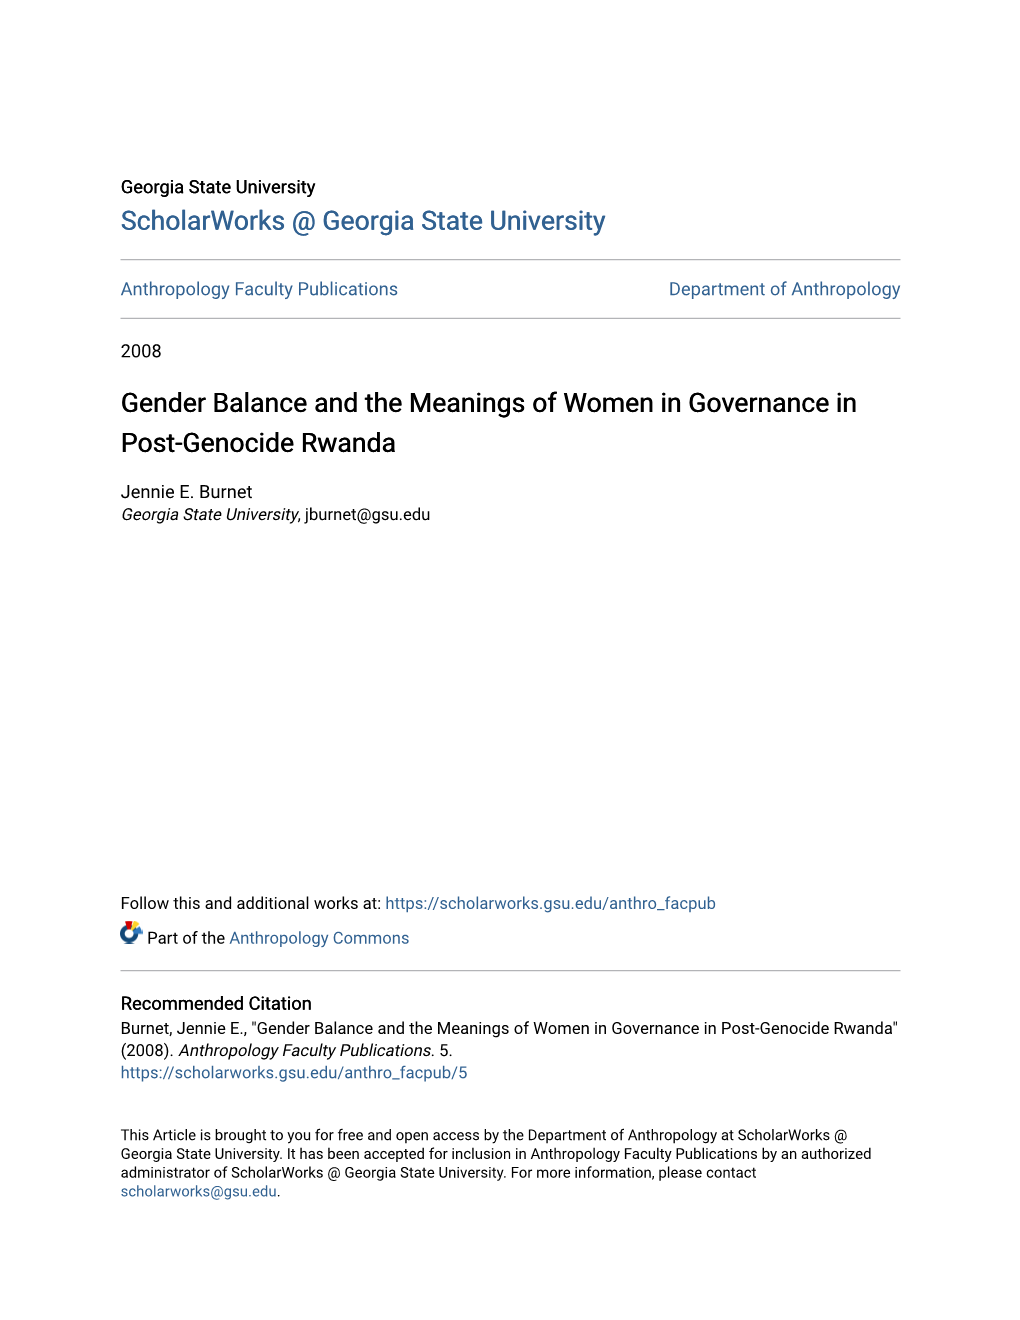 Gender Balance and the Meanings of Women in Governance in Post-Genocide Rwanda